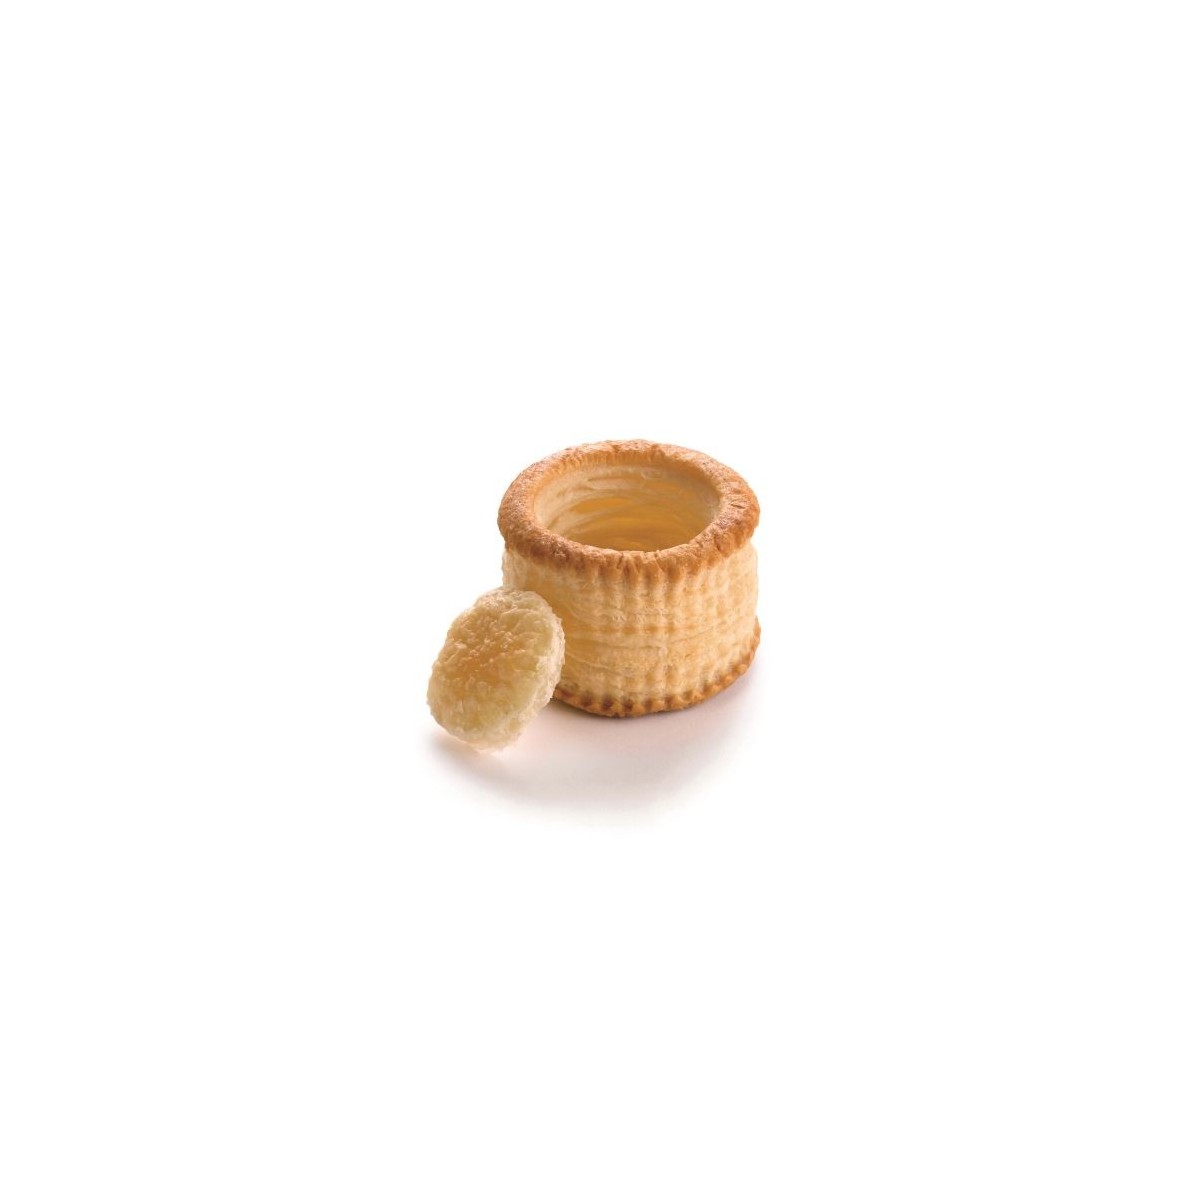 PIDY EMPTY BOUCHEE PUFF PASTRY Ø8CM H4.5CM FIXED HAT 24 PIECES  BOX ON/ORDER